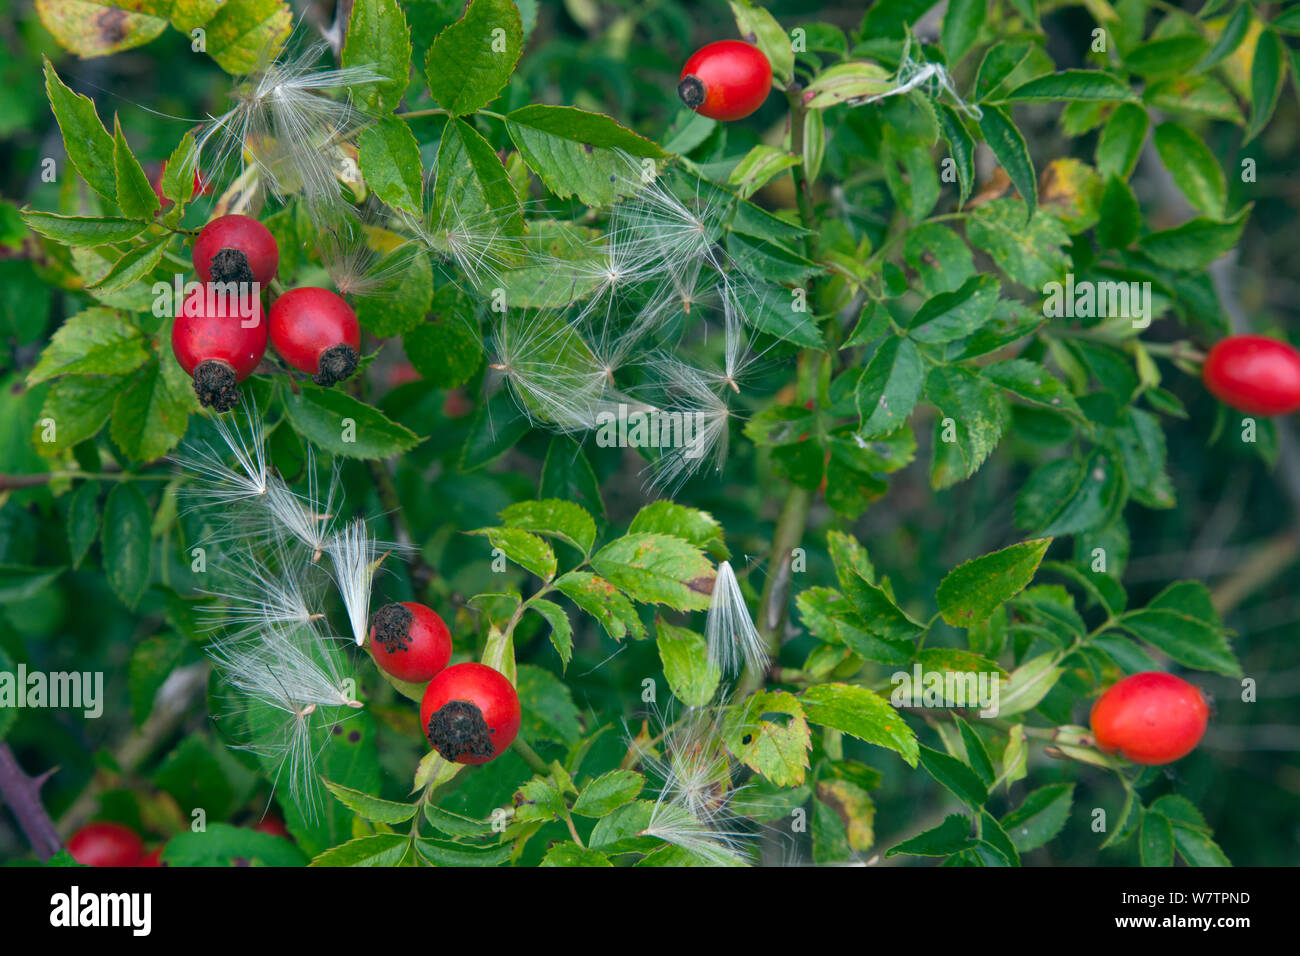 Dog rose (Rosa canina) hips in hedgerow with thistle down, East Anglia, UK, September. Stock Photo